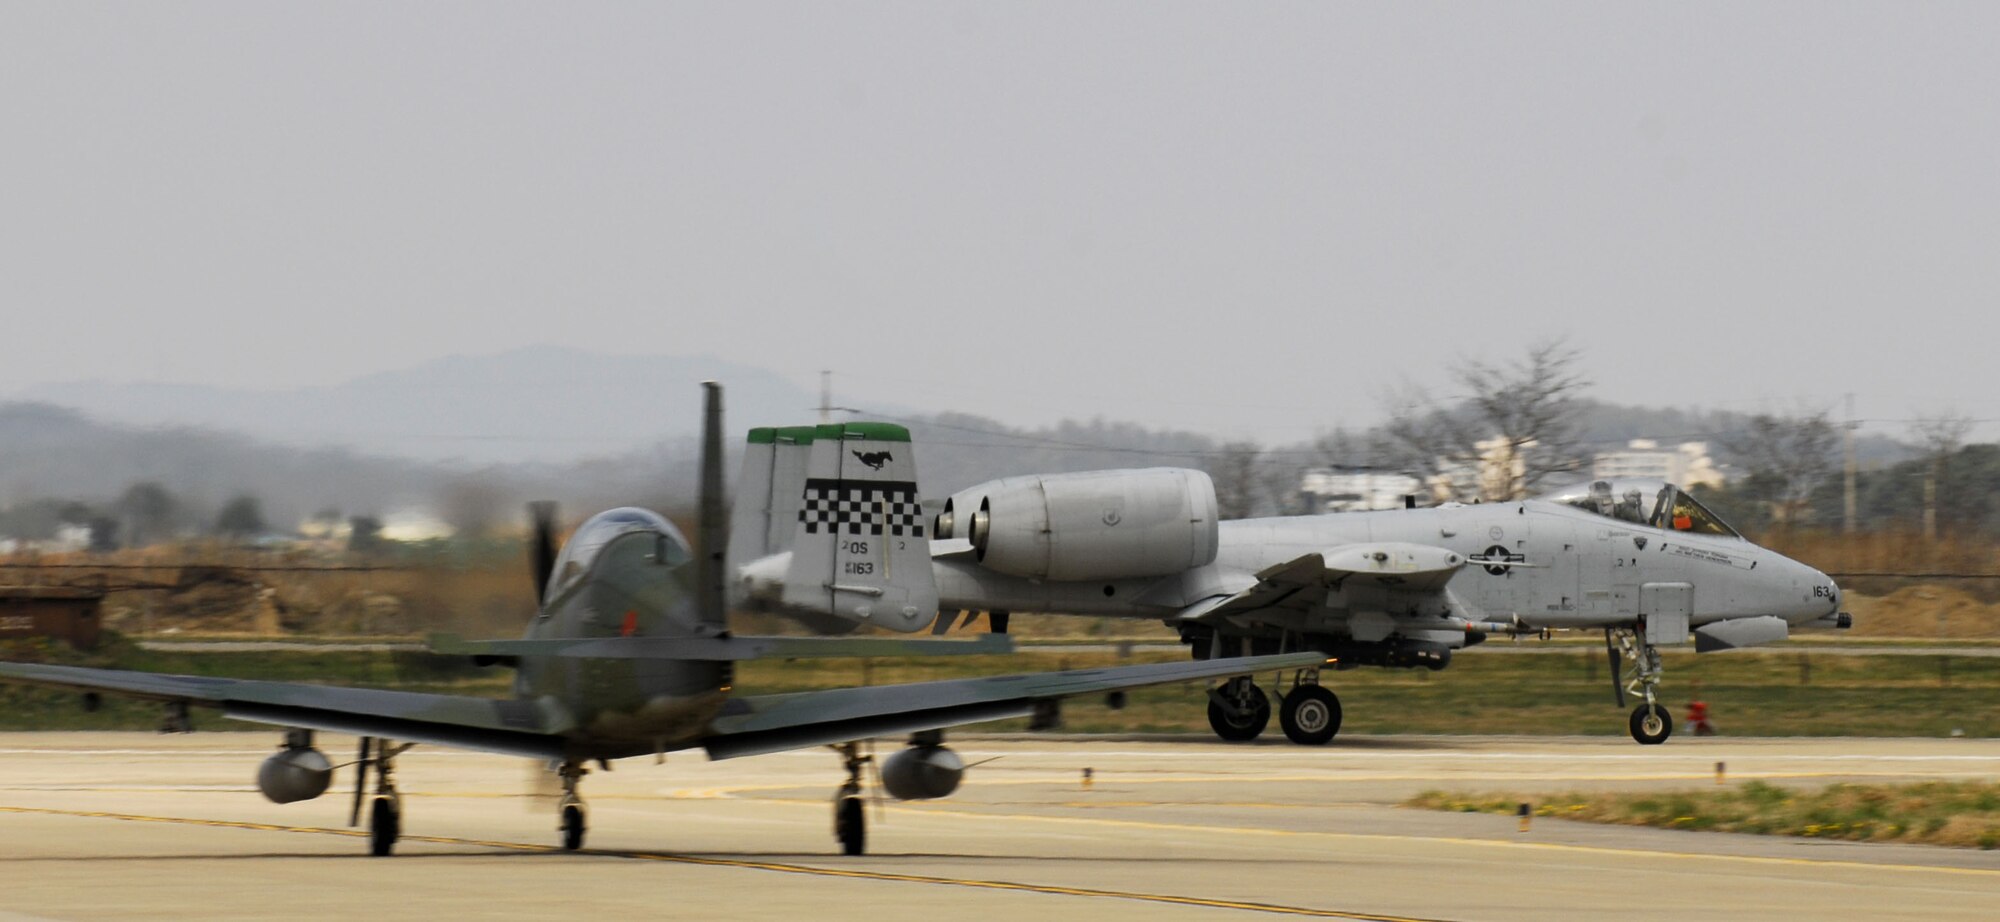 An A-10 Thunderbolt II takes off past a ROKAF KA-1 during the Buddy Wing Program at Osan AB, Republic of Korea on April 14. The 51st Fighter Wing hosted a combined exchange exercise called the Buddy Wing Program this week, with the participation from 25th Fighter Squadron here and Republic of Korea Air Force 15th Composite Wing from Seoul Air Base. The ROKAF aircrew members along with 25 FS trained together in this program allowing both units to introduce tactics and improve interoperability between the U.S. Air Force and the Republic of Korea. (U.S. Air Force photo by Senior Airman Stephenie Wade)